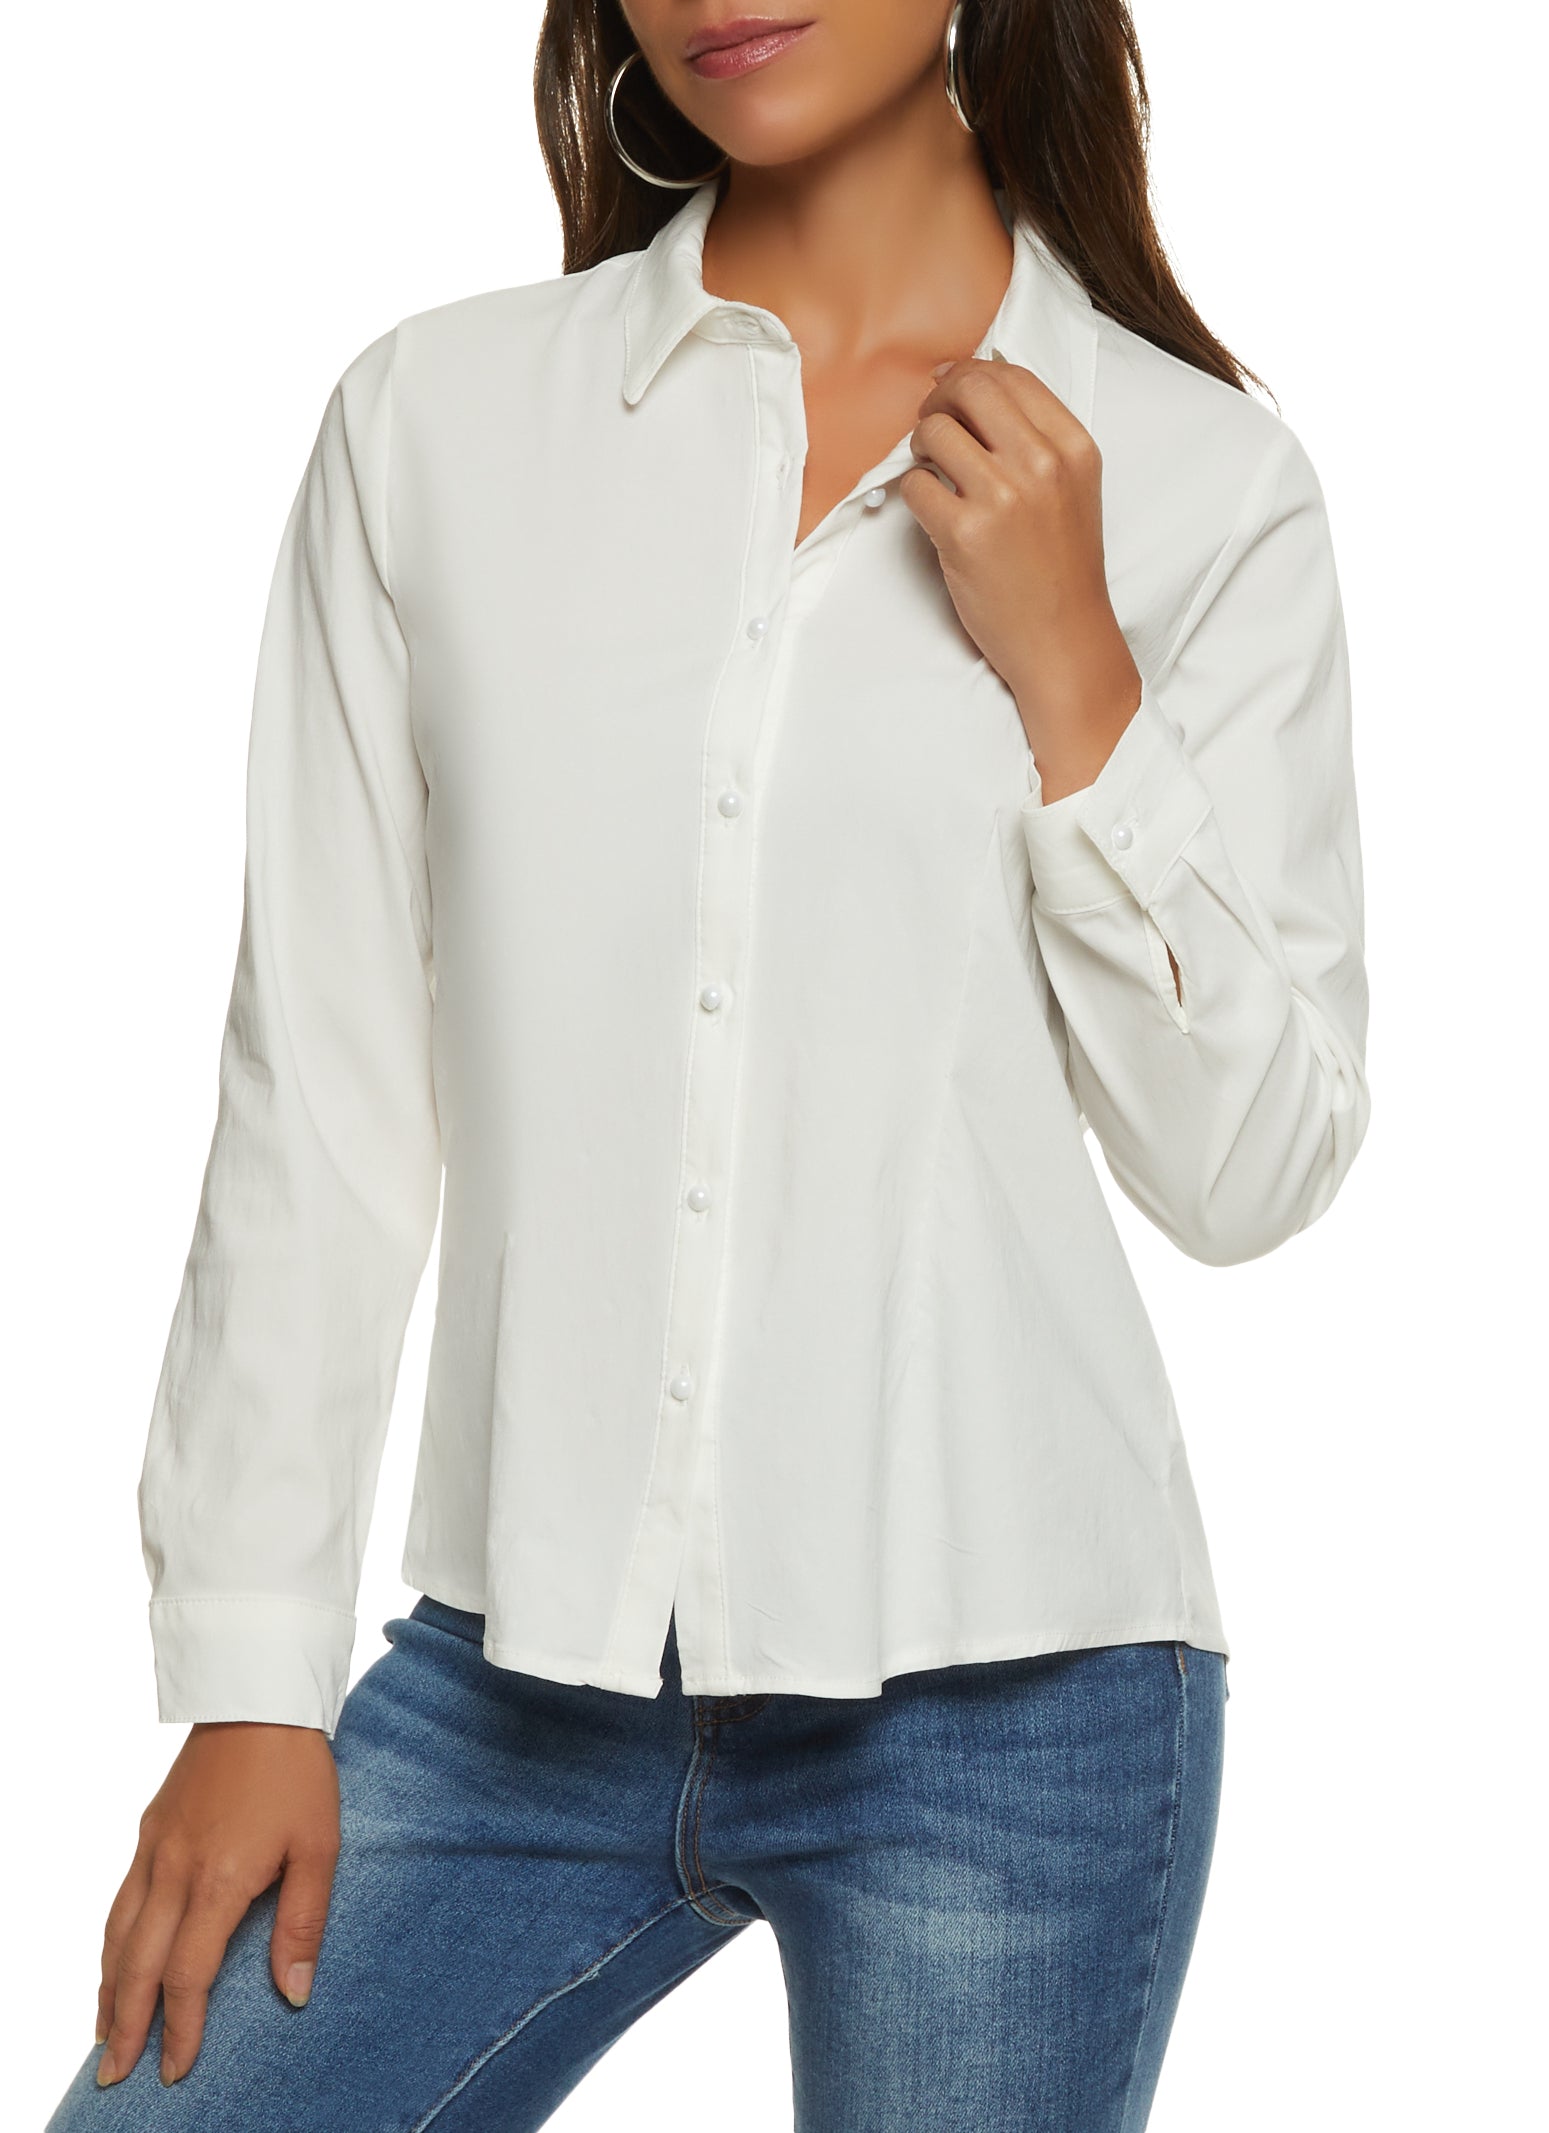 Womens Long Sleeve Faux Pearl Button Front Shirt, White, Size S